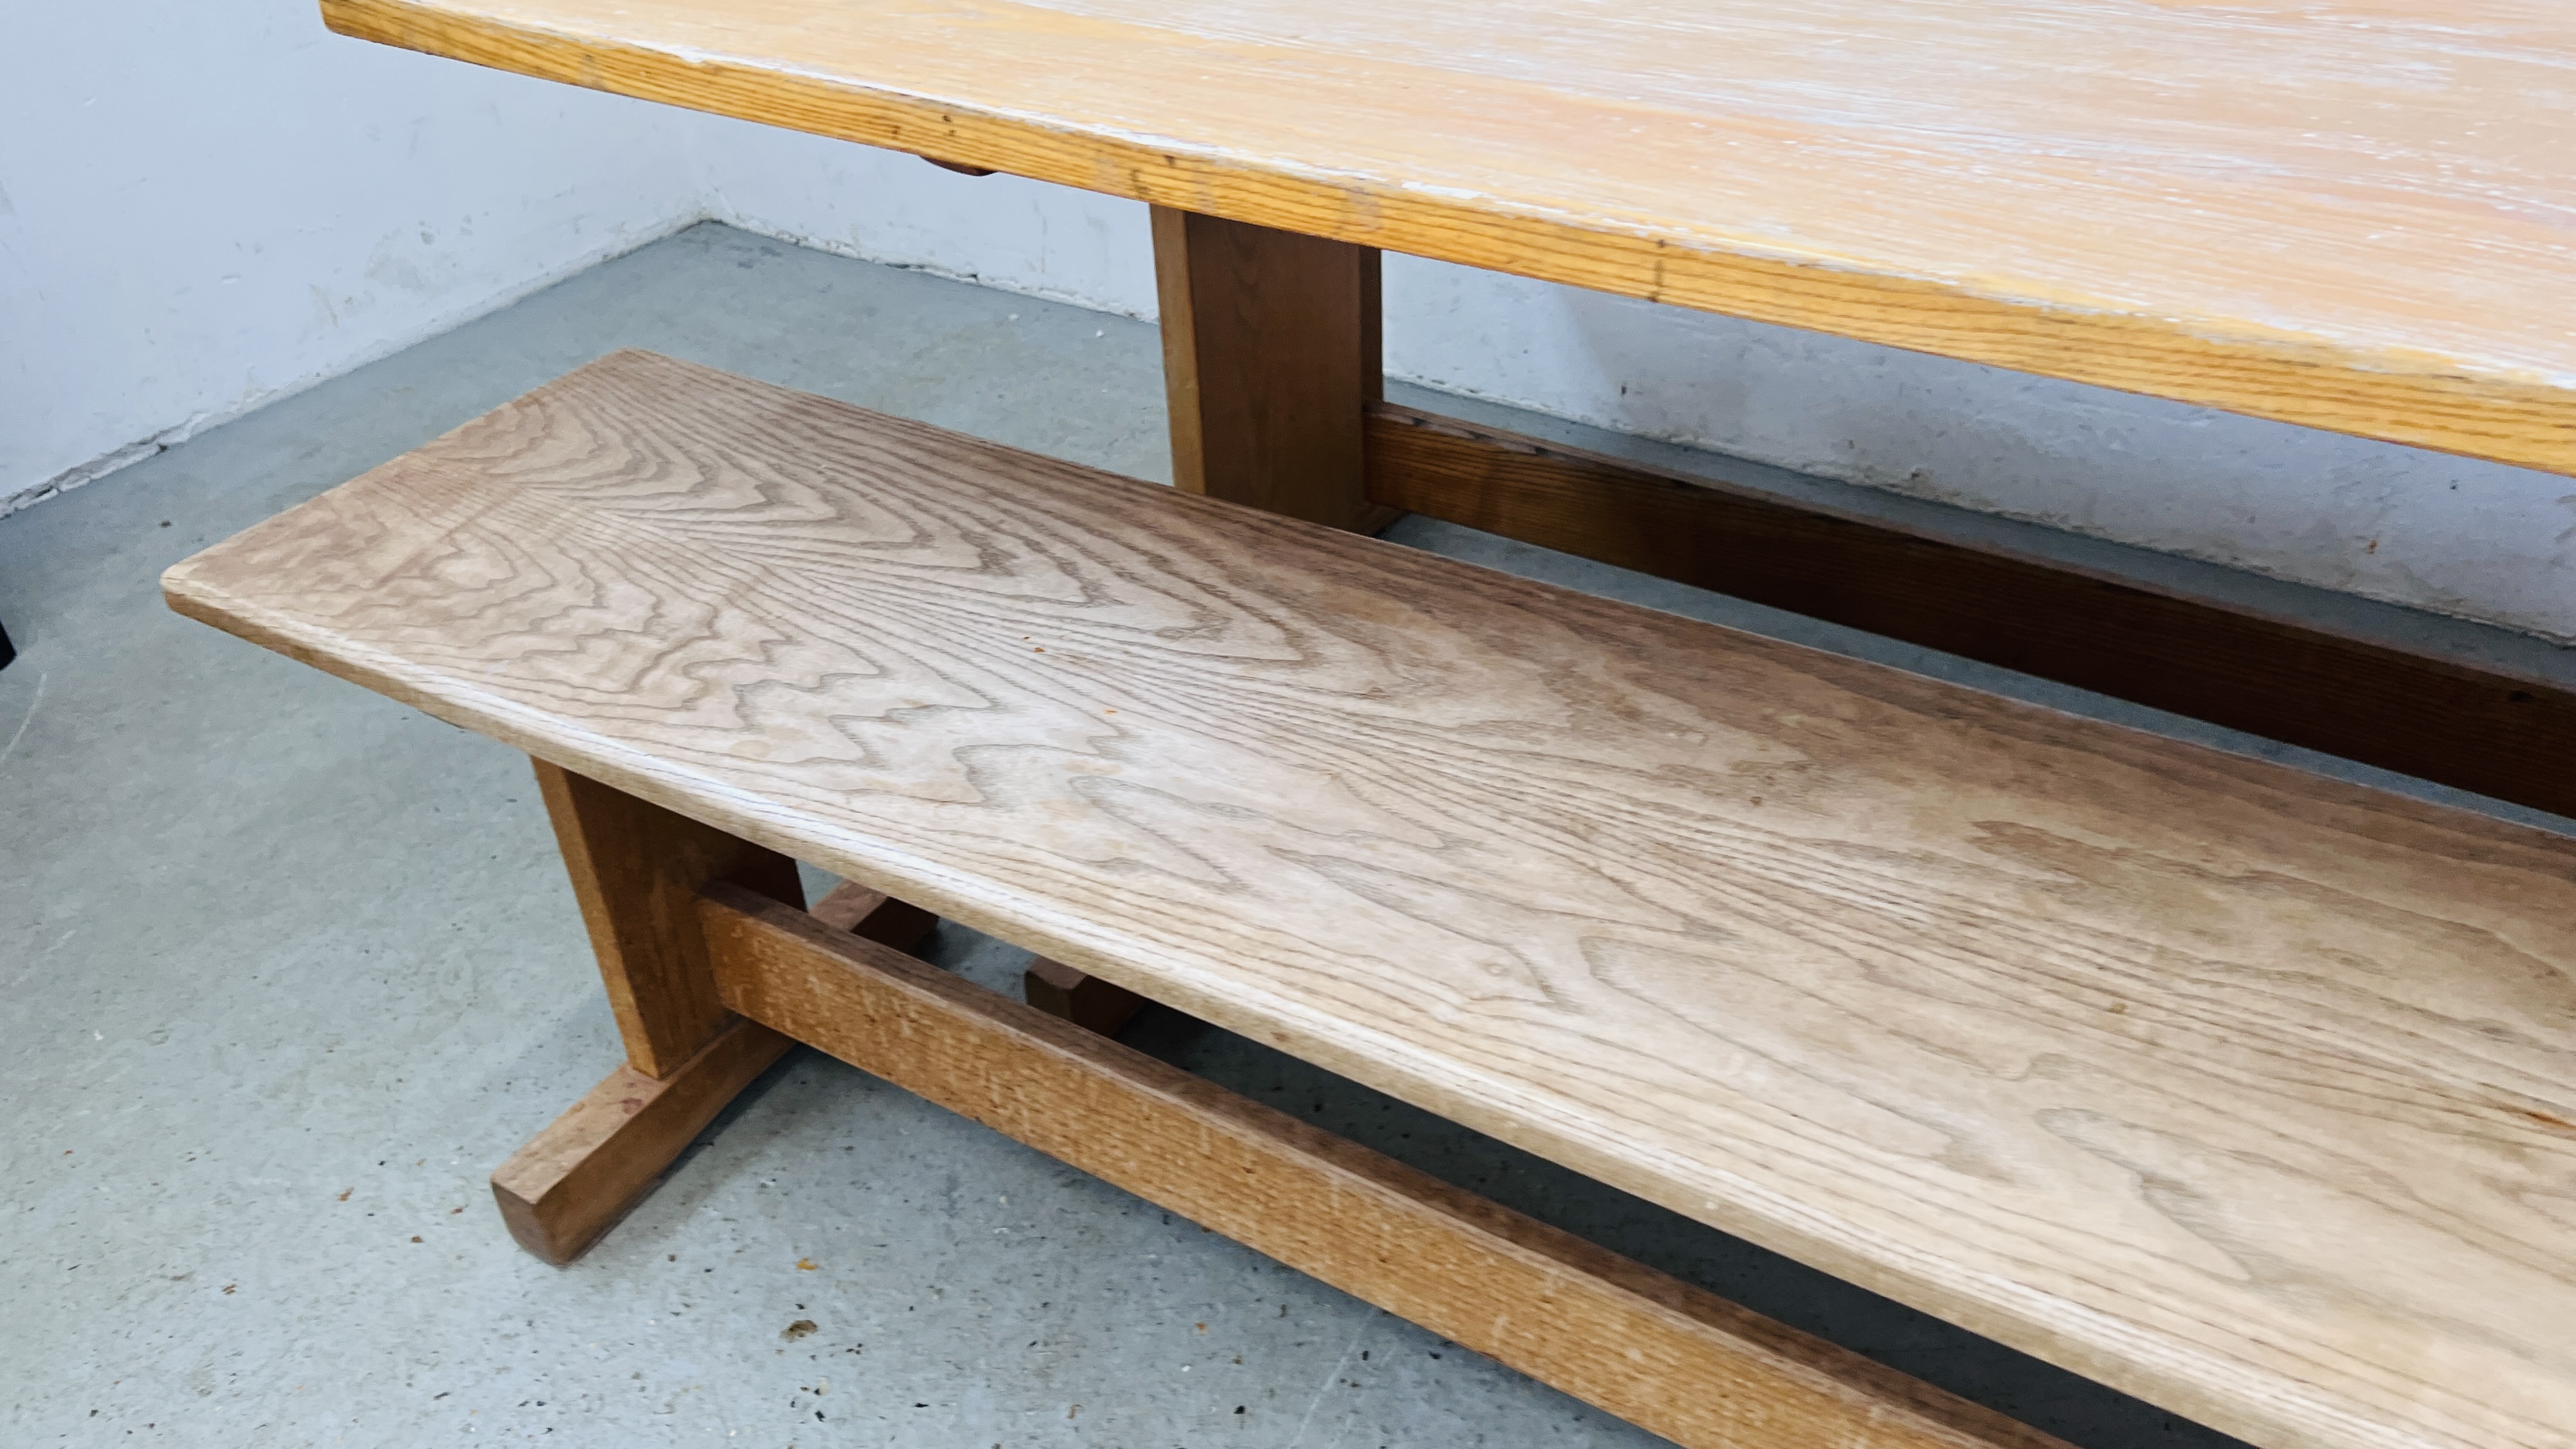 A HEAVY OAK KITCHEN TABLE L 168CM X W 79CM X H 73CM ALONG WITH A PAIR OF OAK BENCHES L 167 X W 35 X - Image 4 of 11